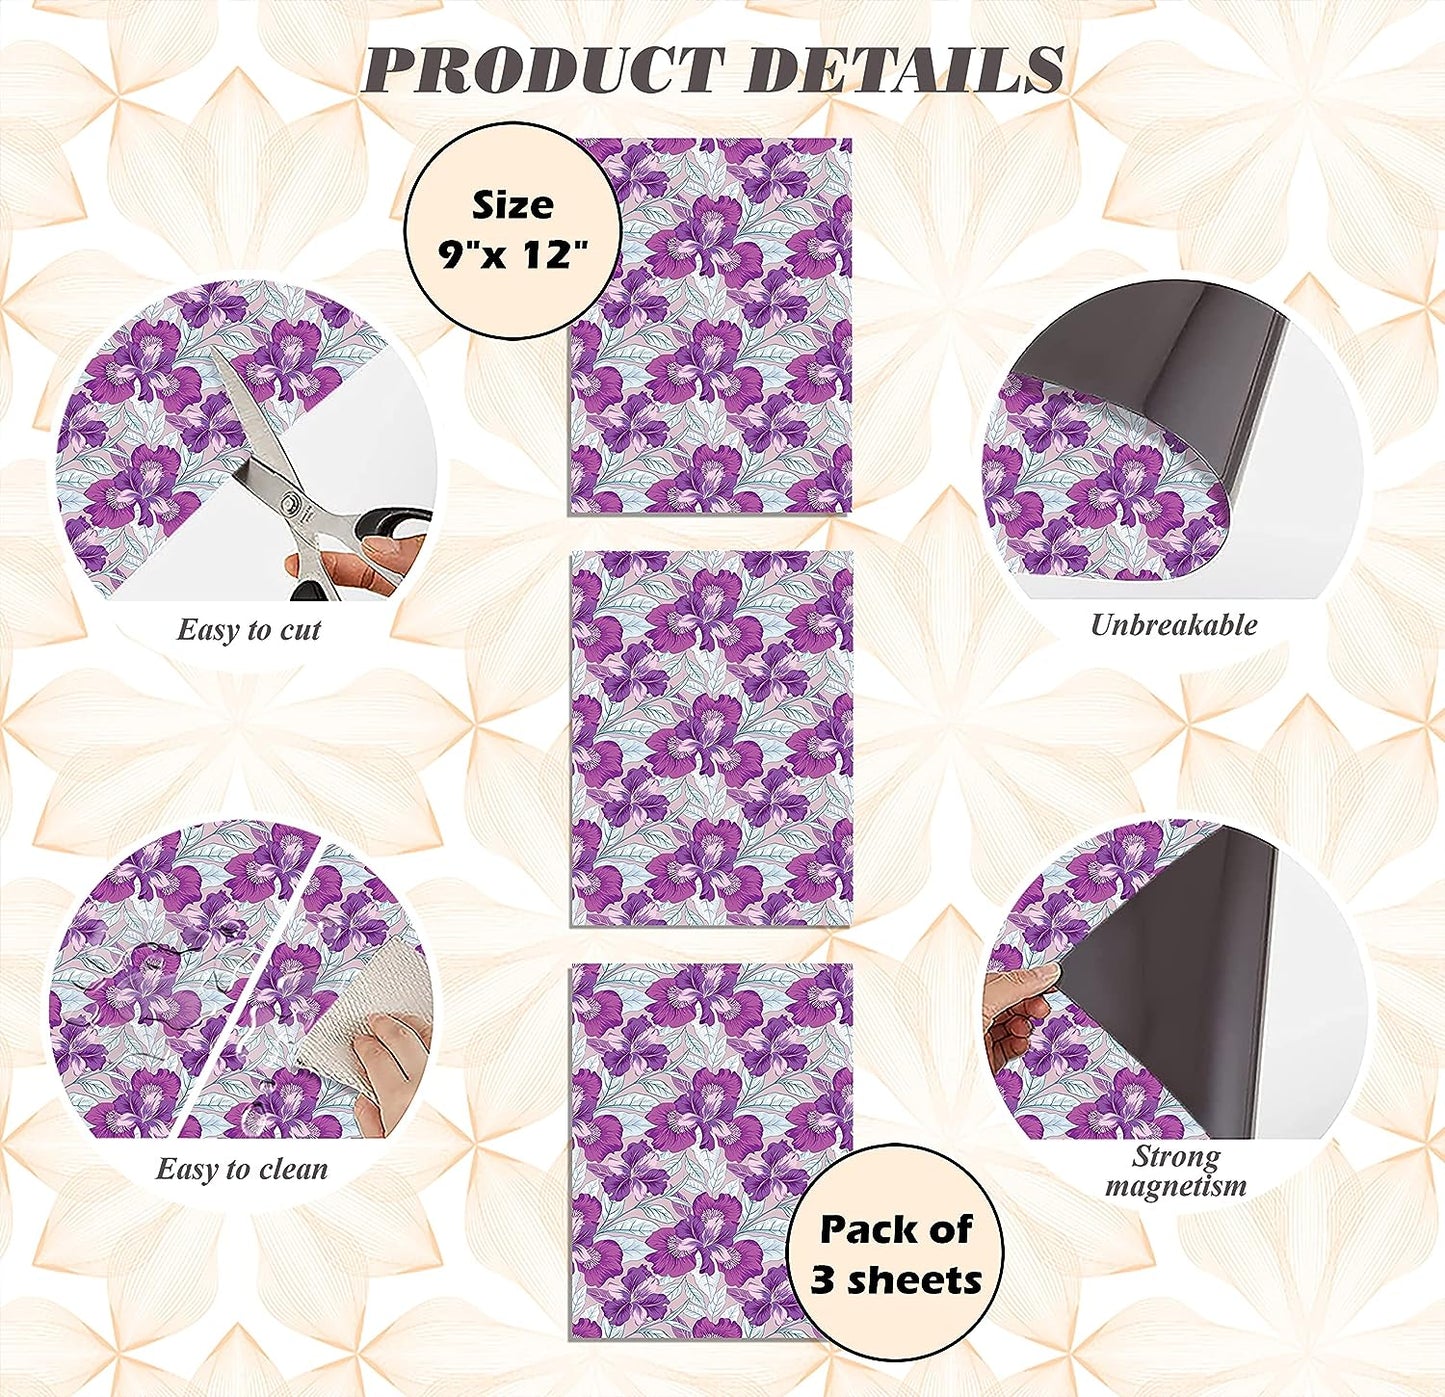 PELICAN INDUSTRIAL Magnetic Locker Wallpaper (Full Sheet Magnetic) - Remove & Reuse Decorative Vinyl - Made in USA - Fade, Tear and Water Resistant - (Tropical Leaves) - Pack of 3 Sheets (vb057)